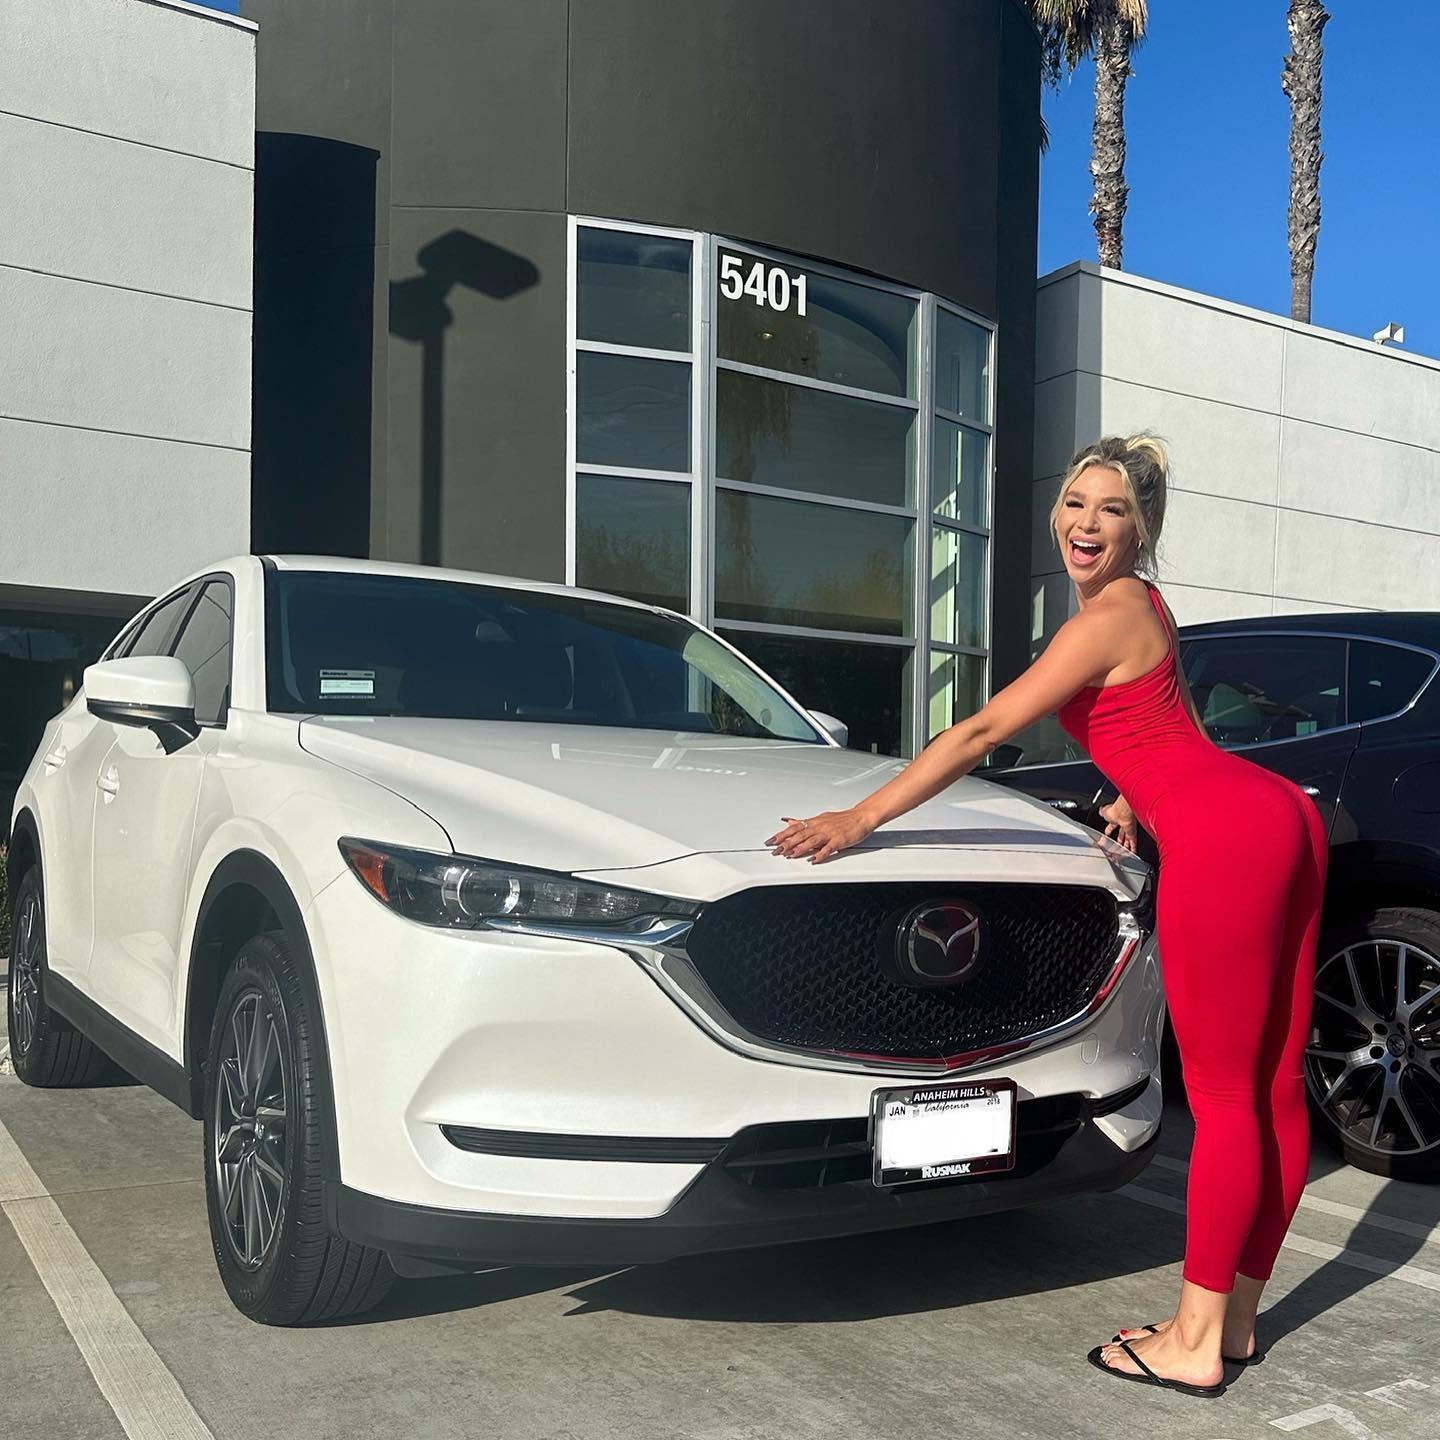 Lindsey Gordon In Curve-Hugging Bodysuit Poses With New Car 2